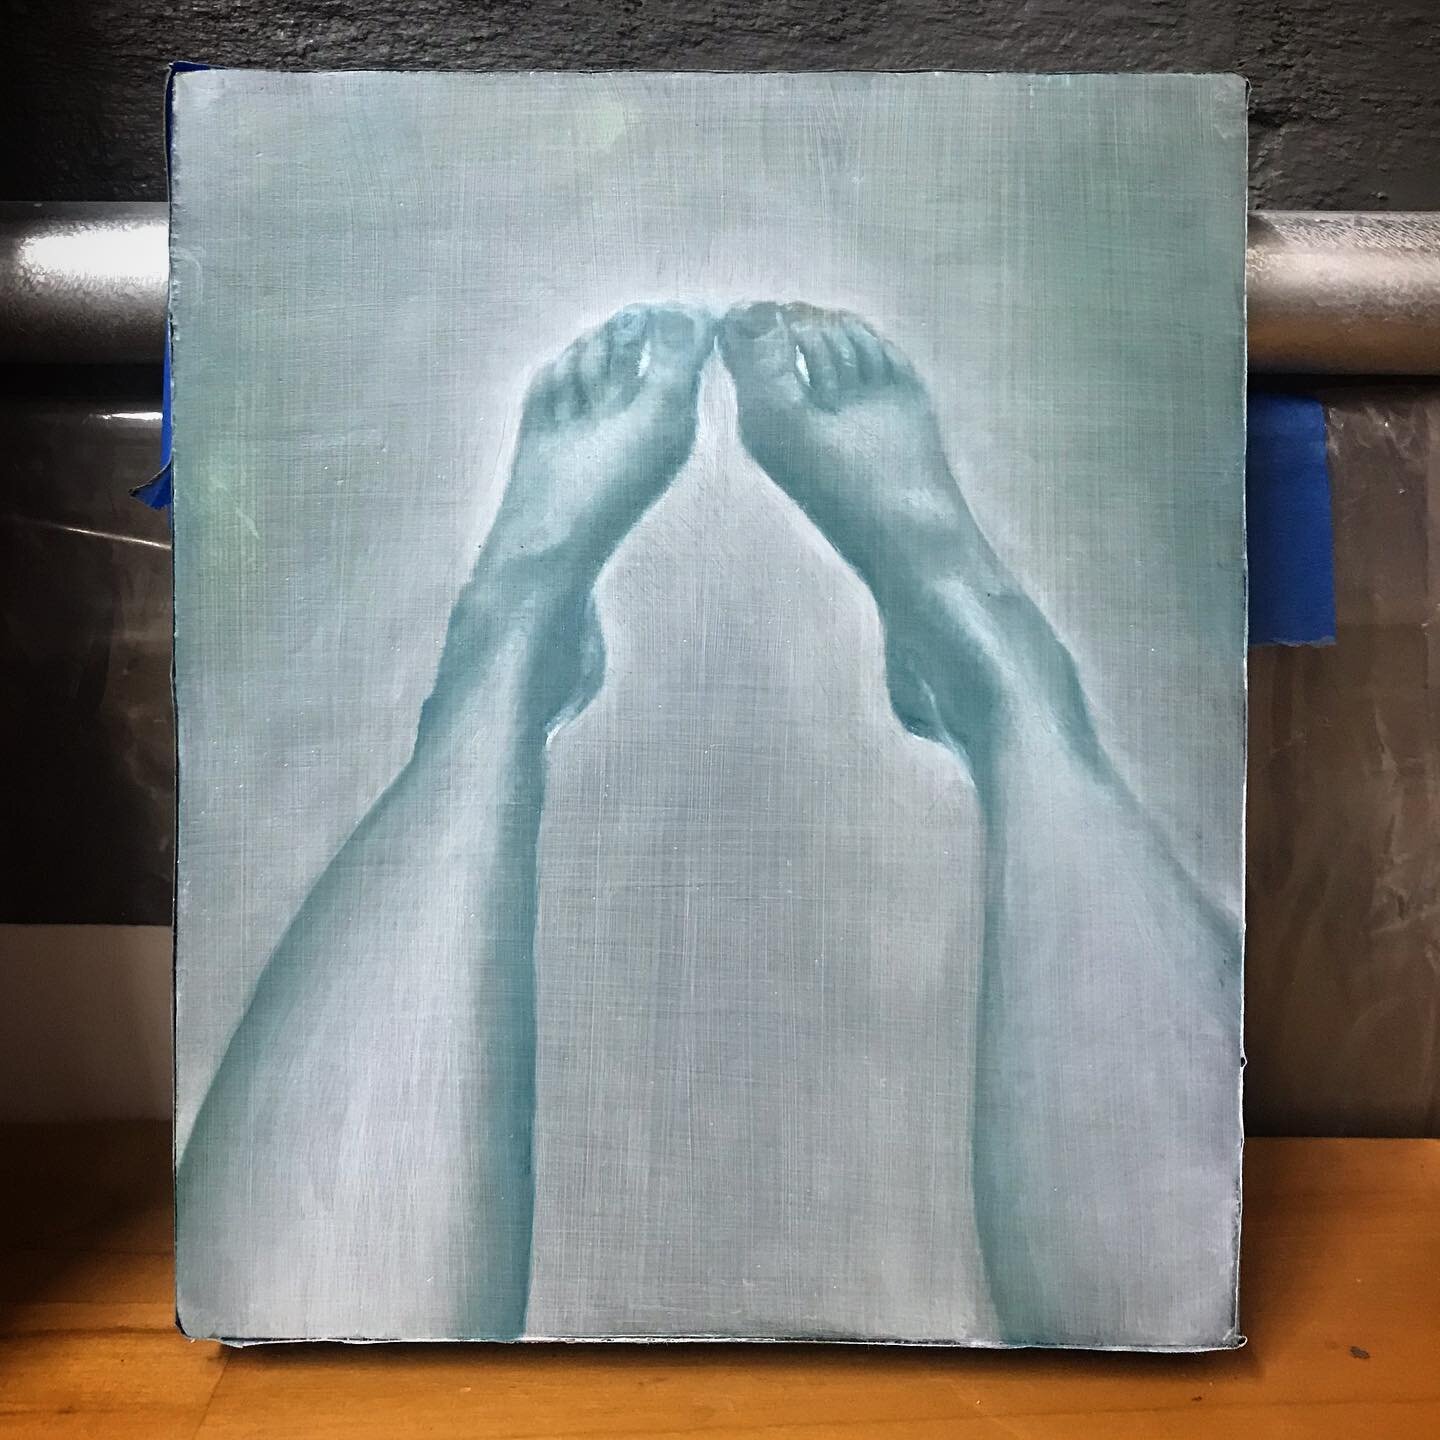 A tiny little painting &mdash; 6 x 4 inches.  Playing with our most familiar supports, ungrounding them and allowing them to float. 
.
.
.
.
.
.
.
.
.
.
#art #fineart #contemporaryart #painting #contemporarypainting #figurativeart #figurativepainting